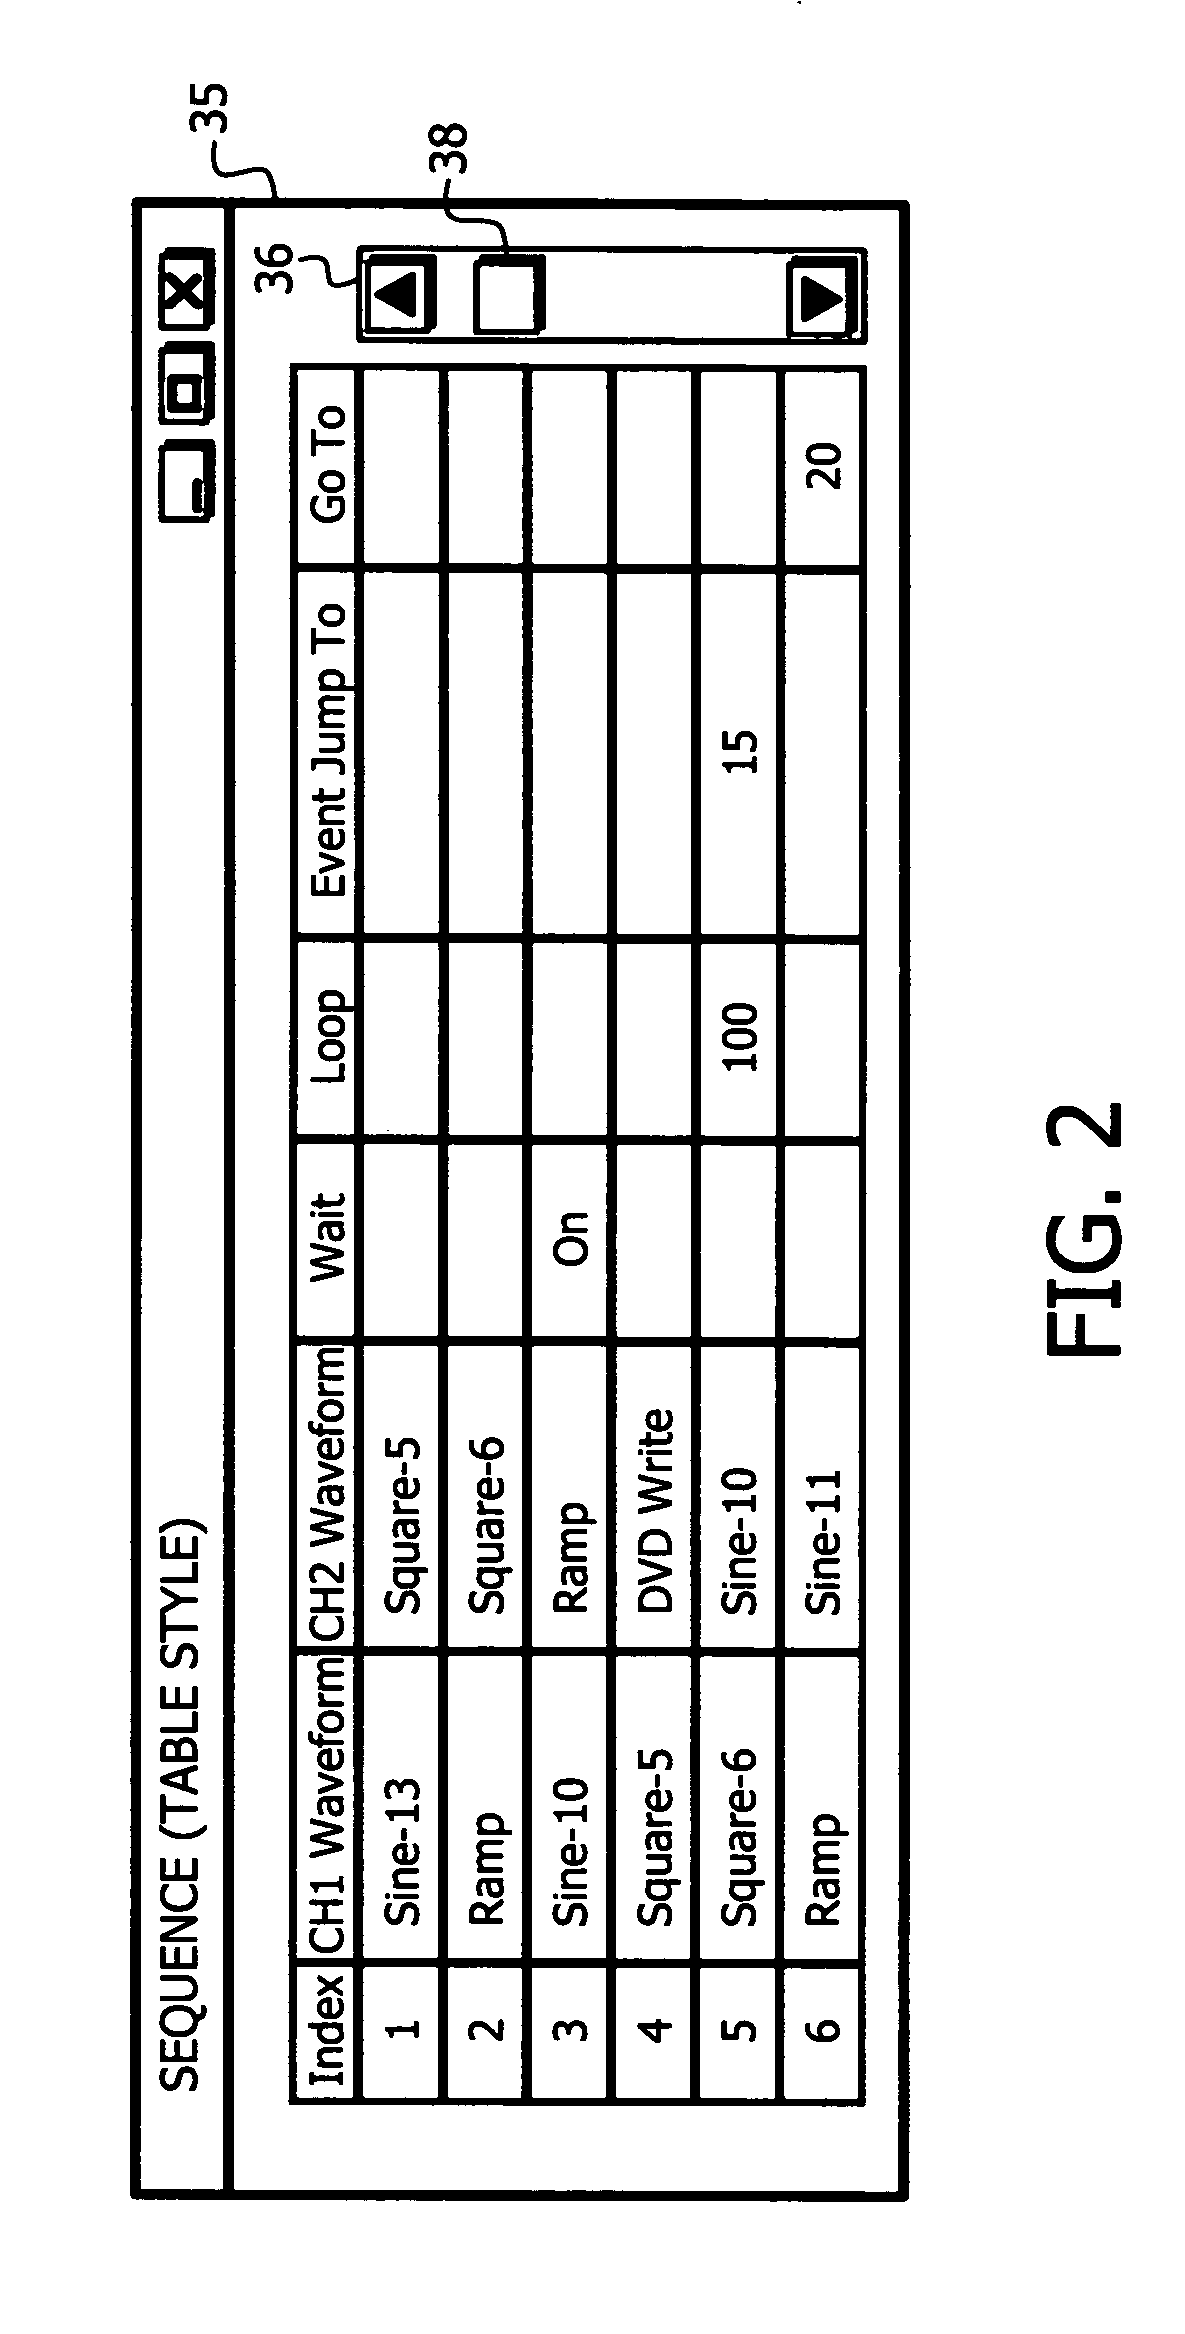 Command and argument description display corresponding to user actions on an electronic instrument